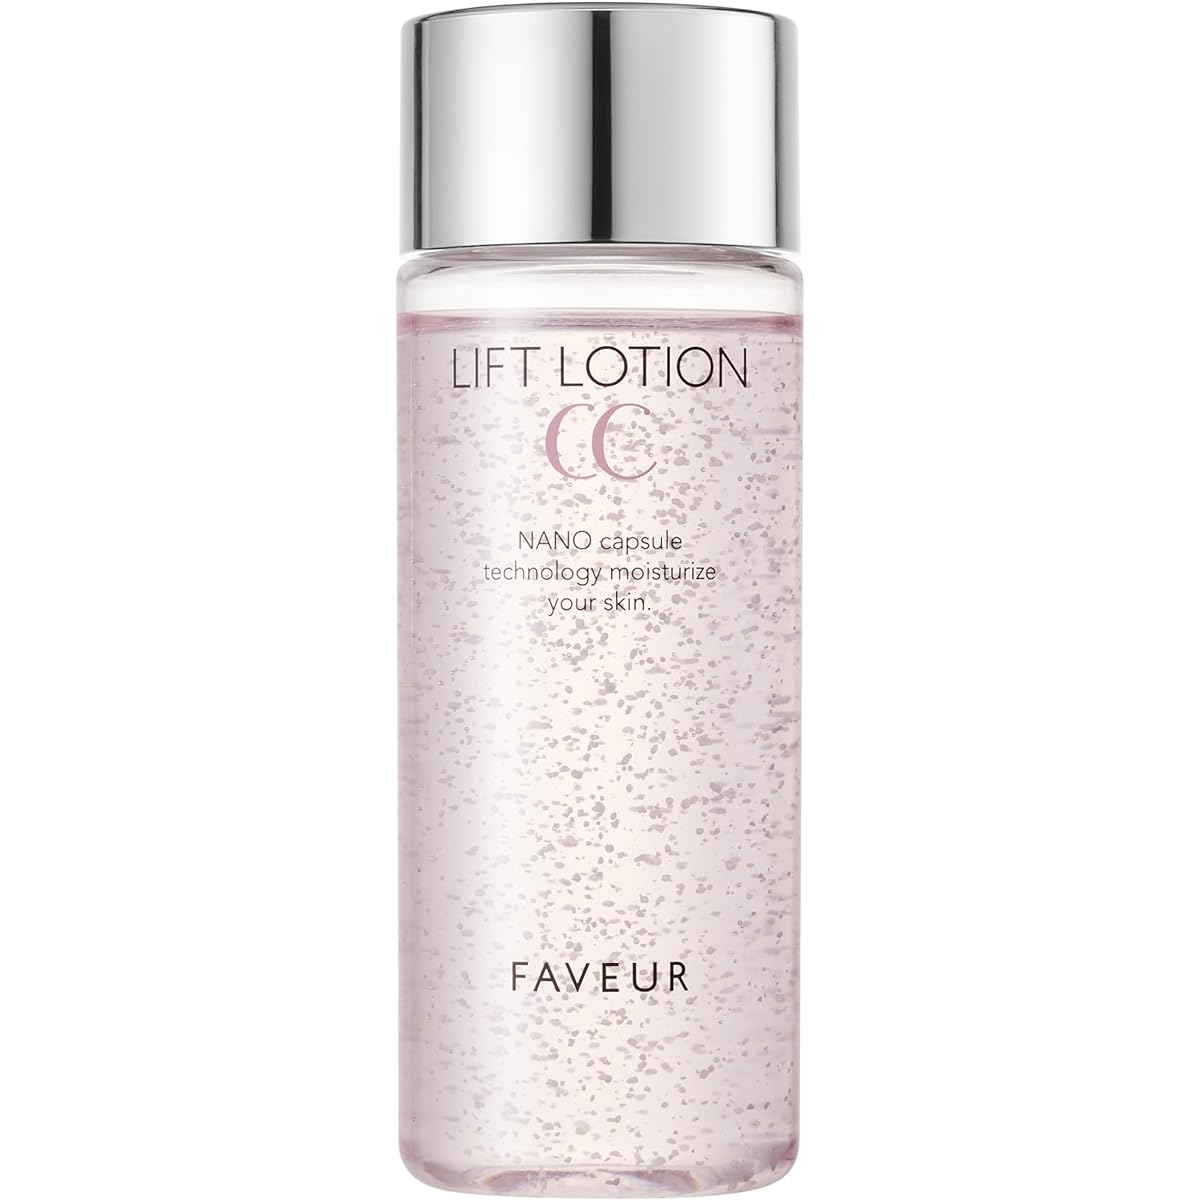 [Fabour] Lift Lotion CC [Lotion, Aging Care, Texture, Firmness, Elasticity, Vitamin Retinol] 110mL/1 bottle (approx. 30 days supply)